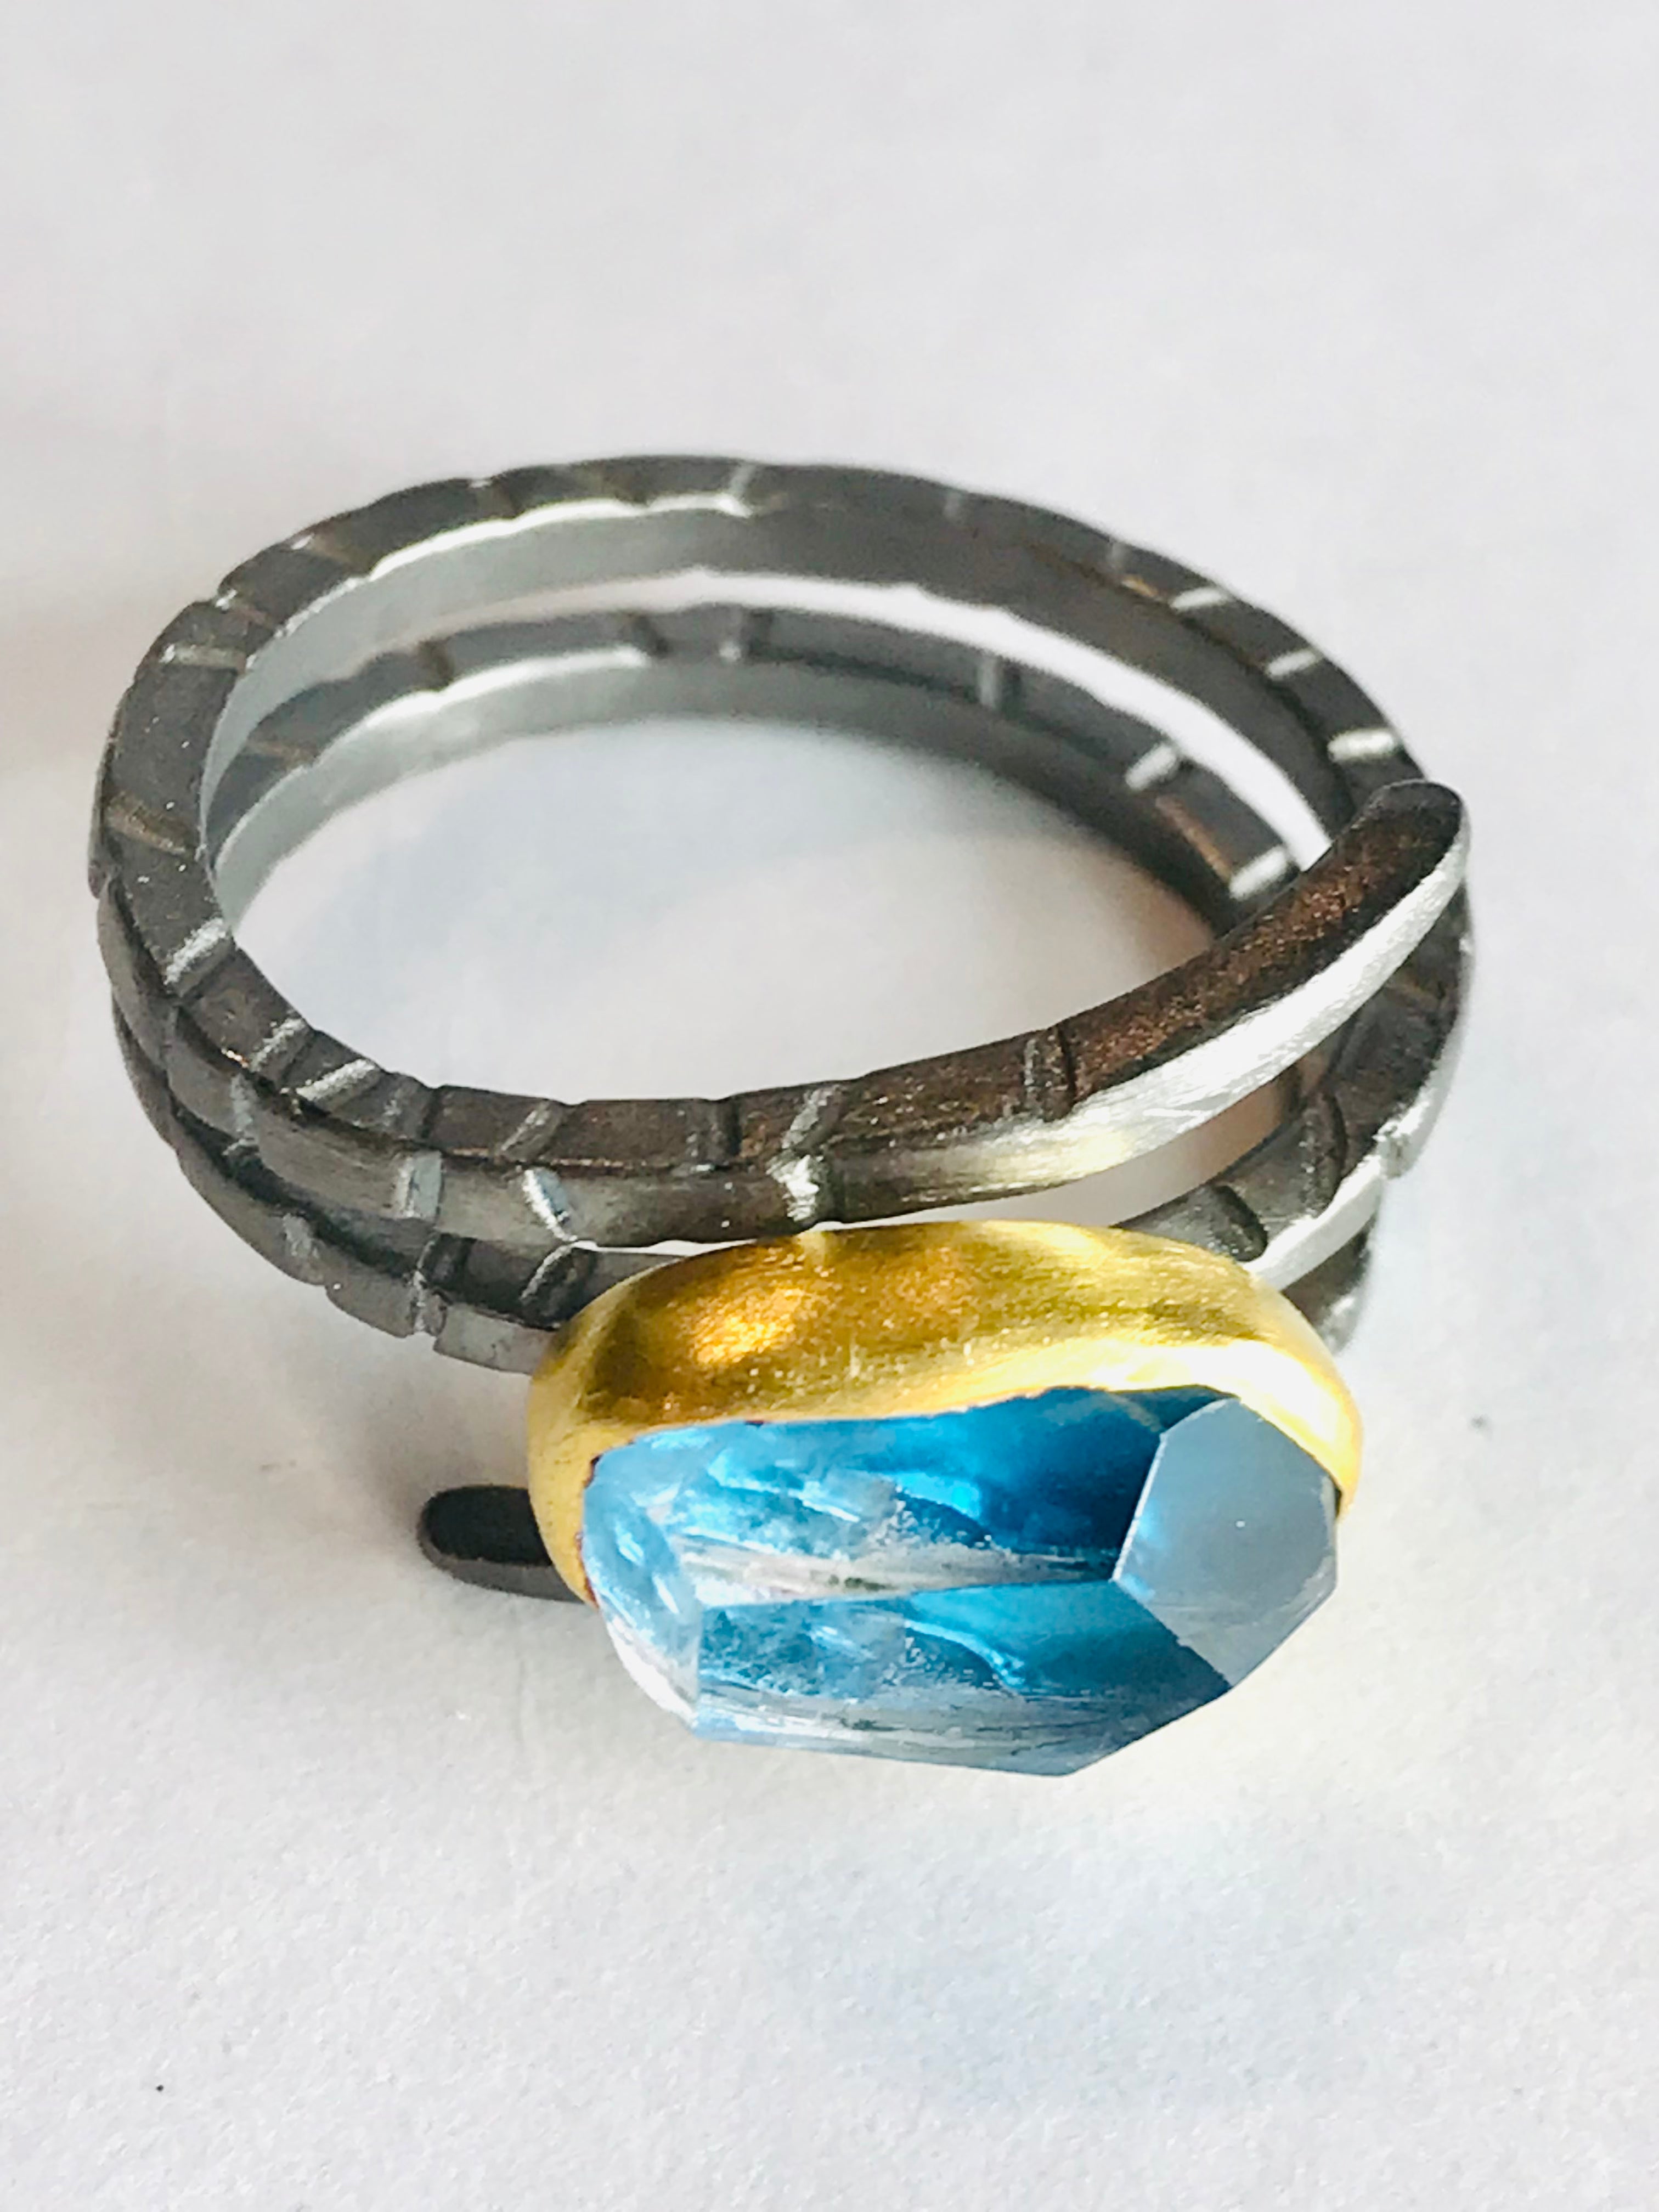 Oxidised Silver Ring with Natural Gemstone Apatite - The Nancy Smillie Shop - Art, Jewellery & Designer Gifts Glasgow